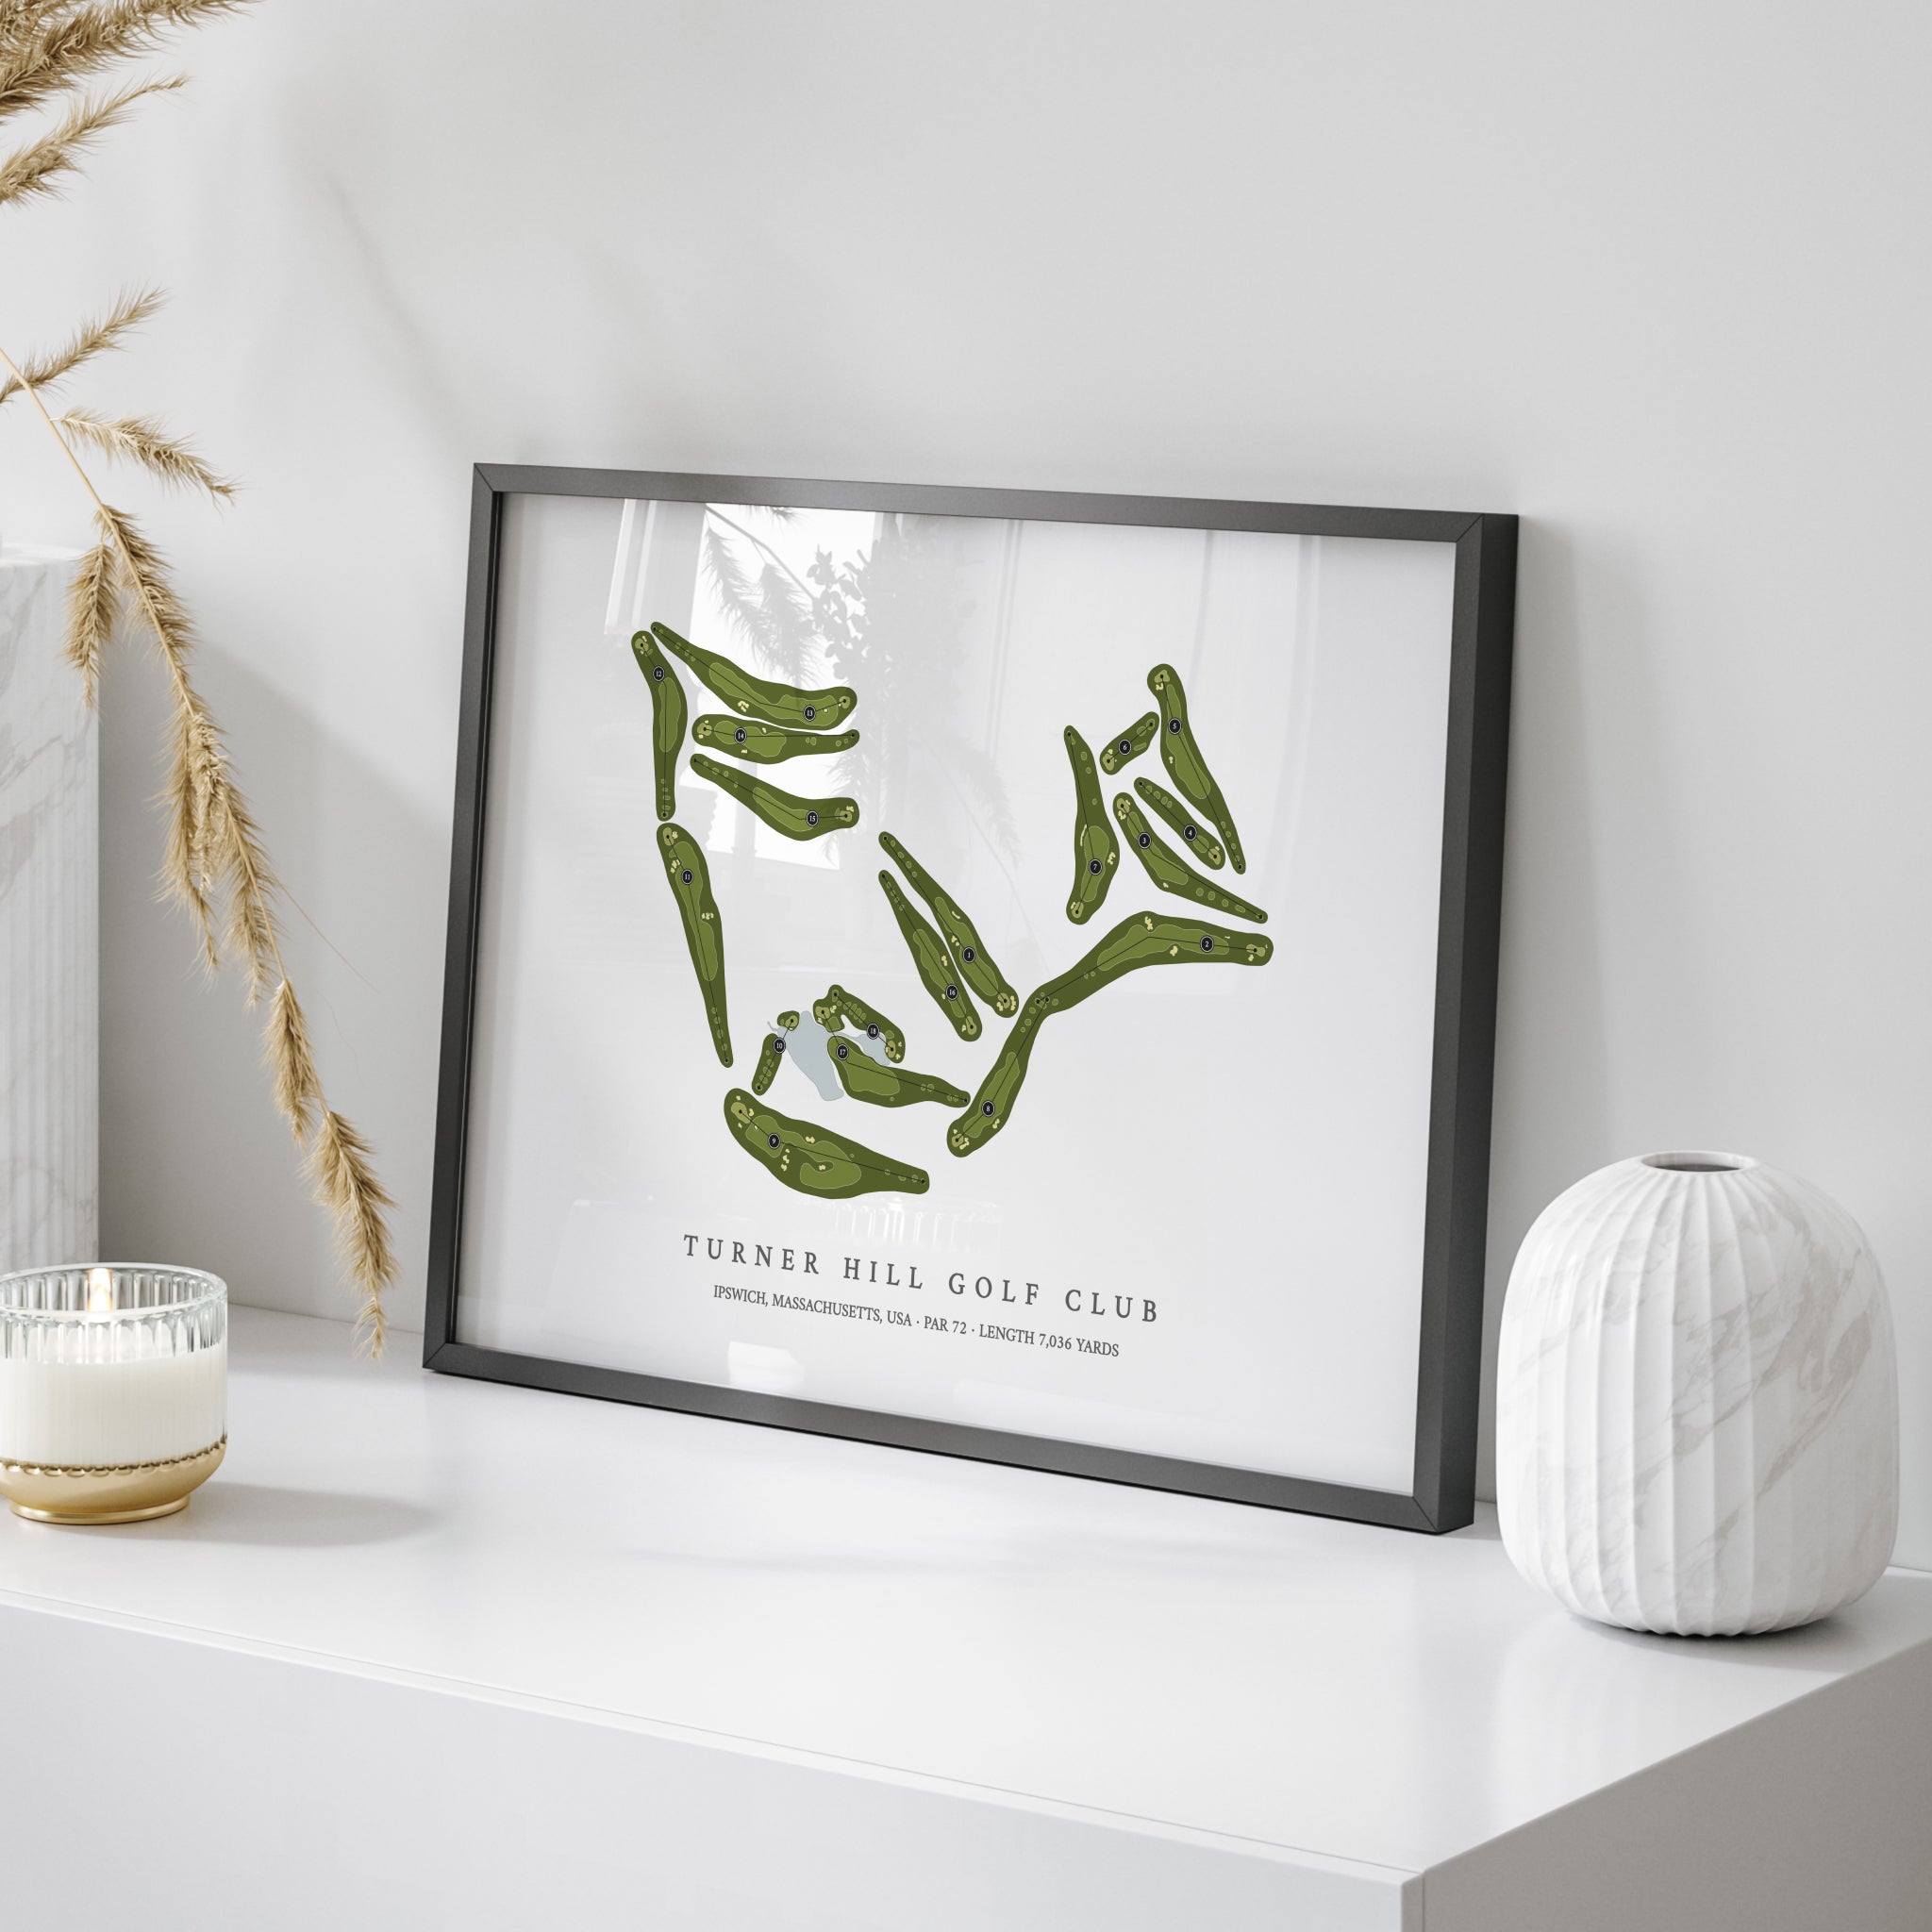 Turner Hill Golf Club | Golf Course Print | On Table 